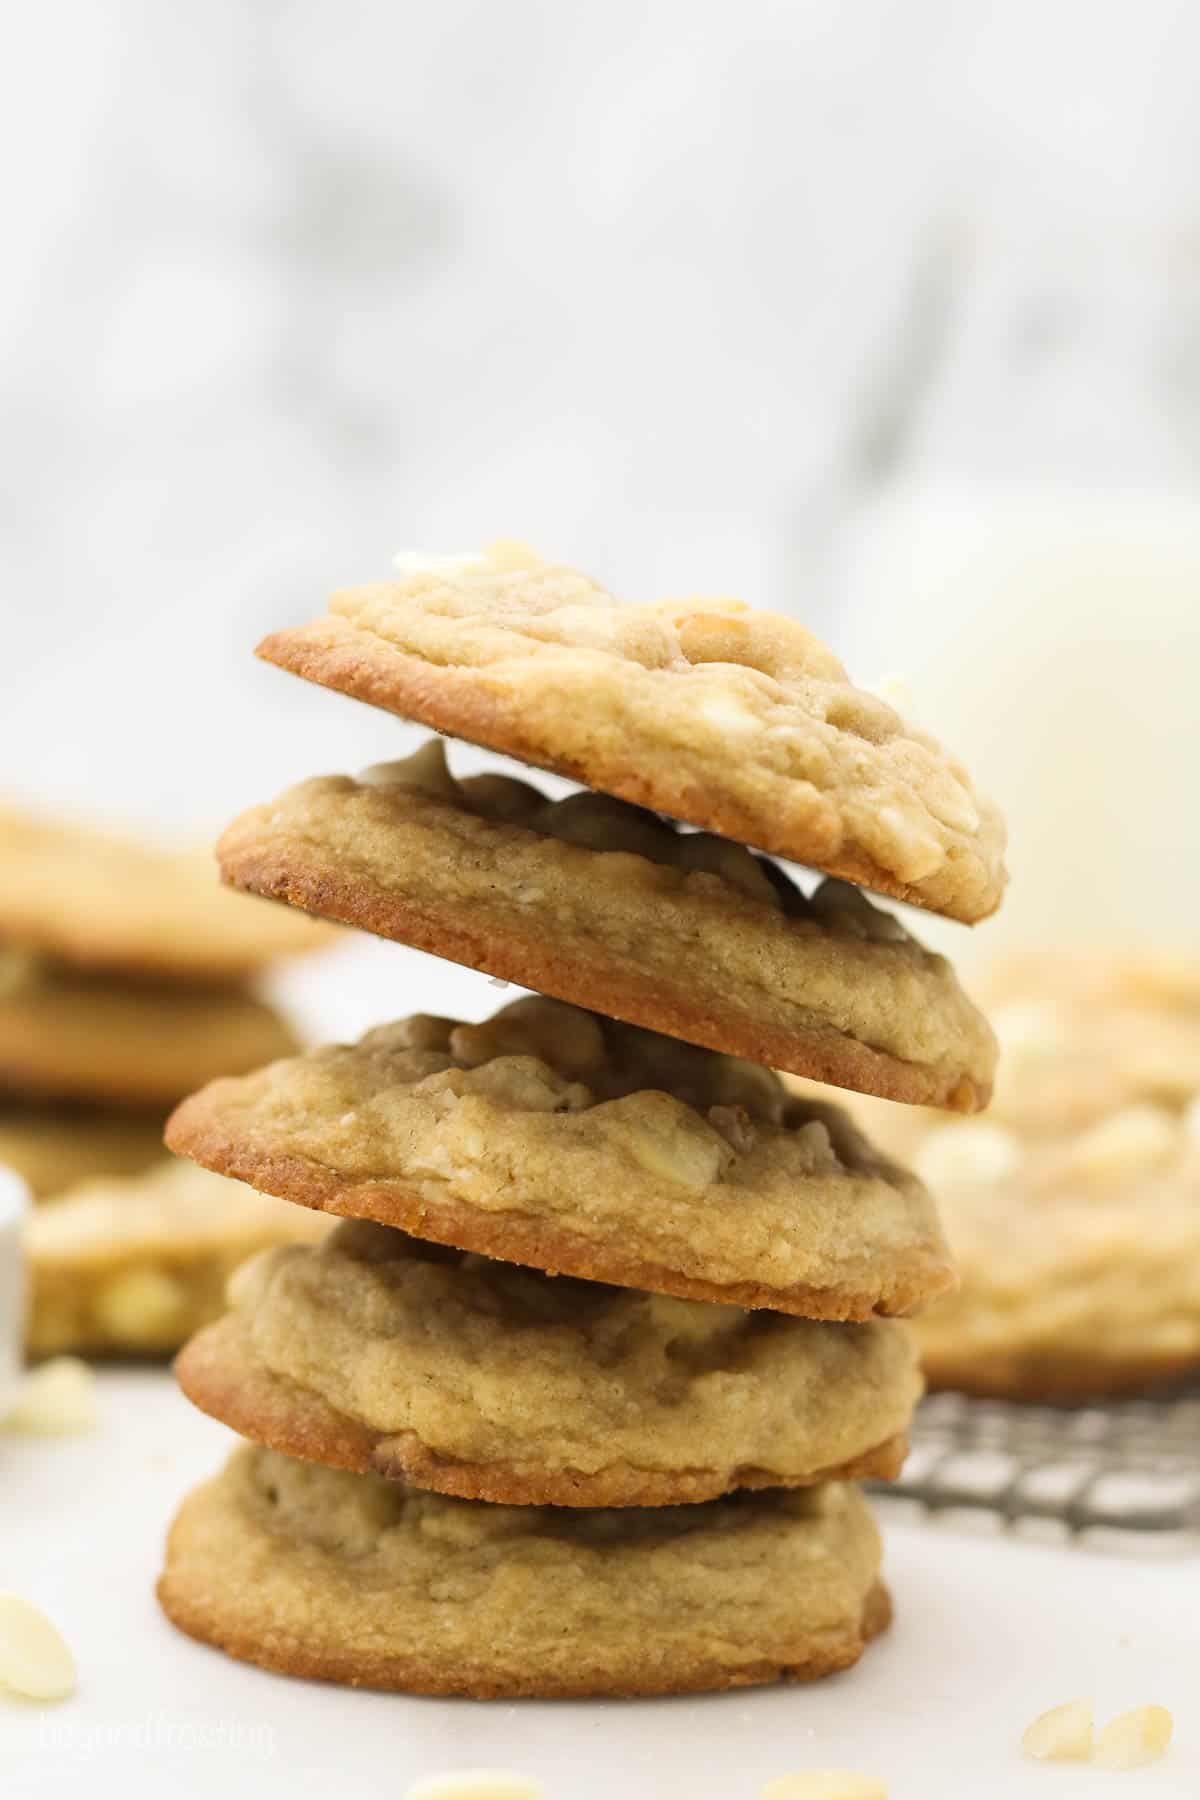 A Stack of Five White Chocolate Macadamia Cookies on a Countertop